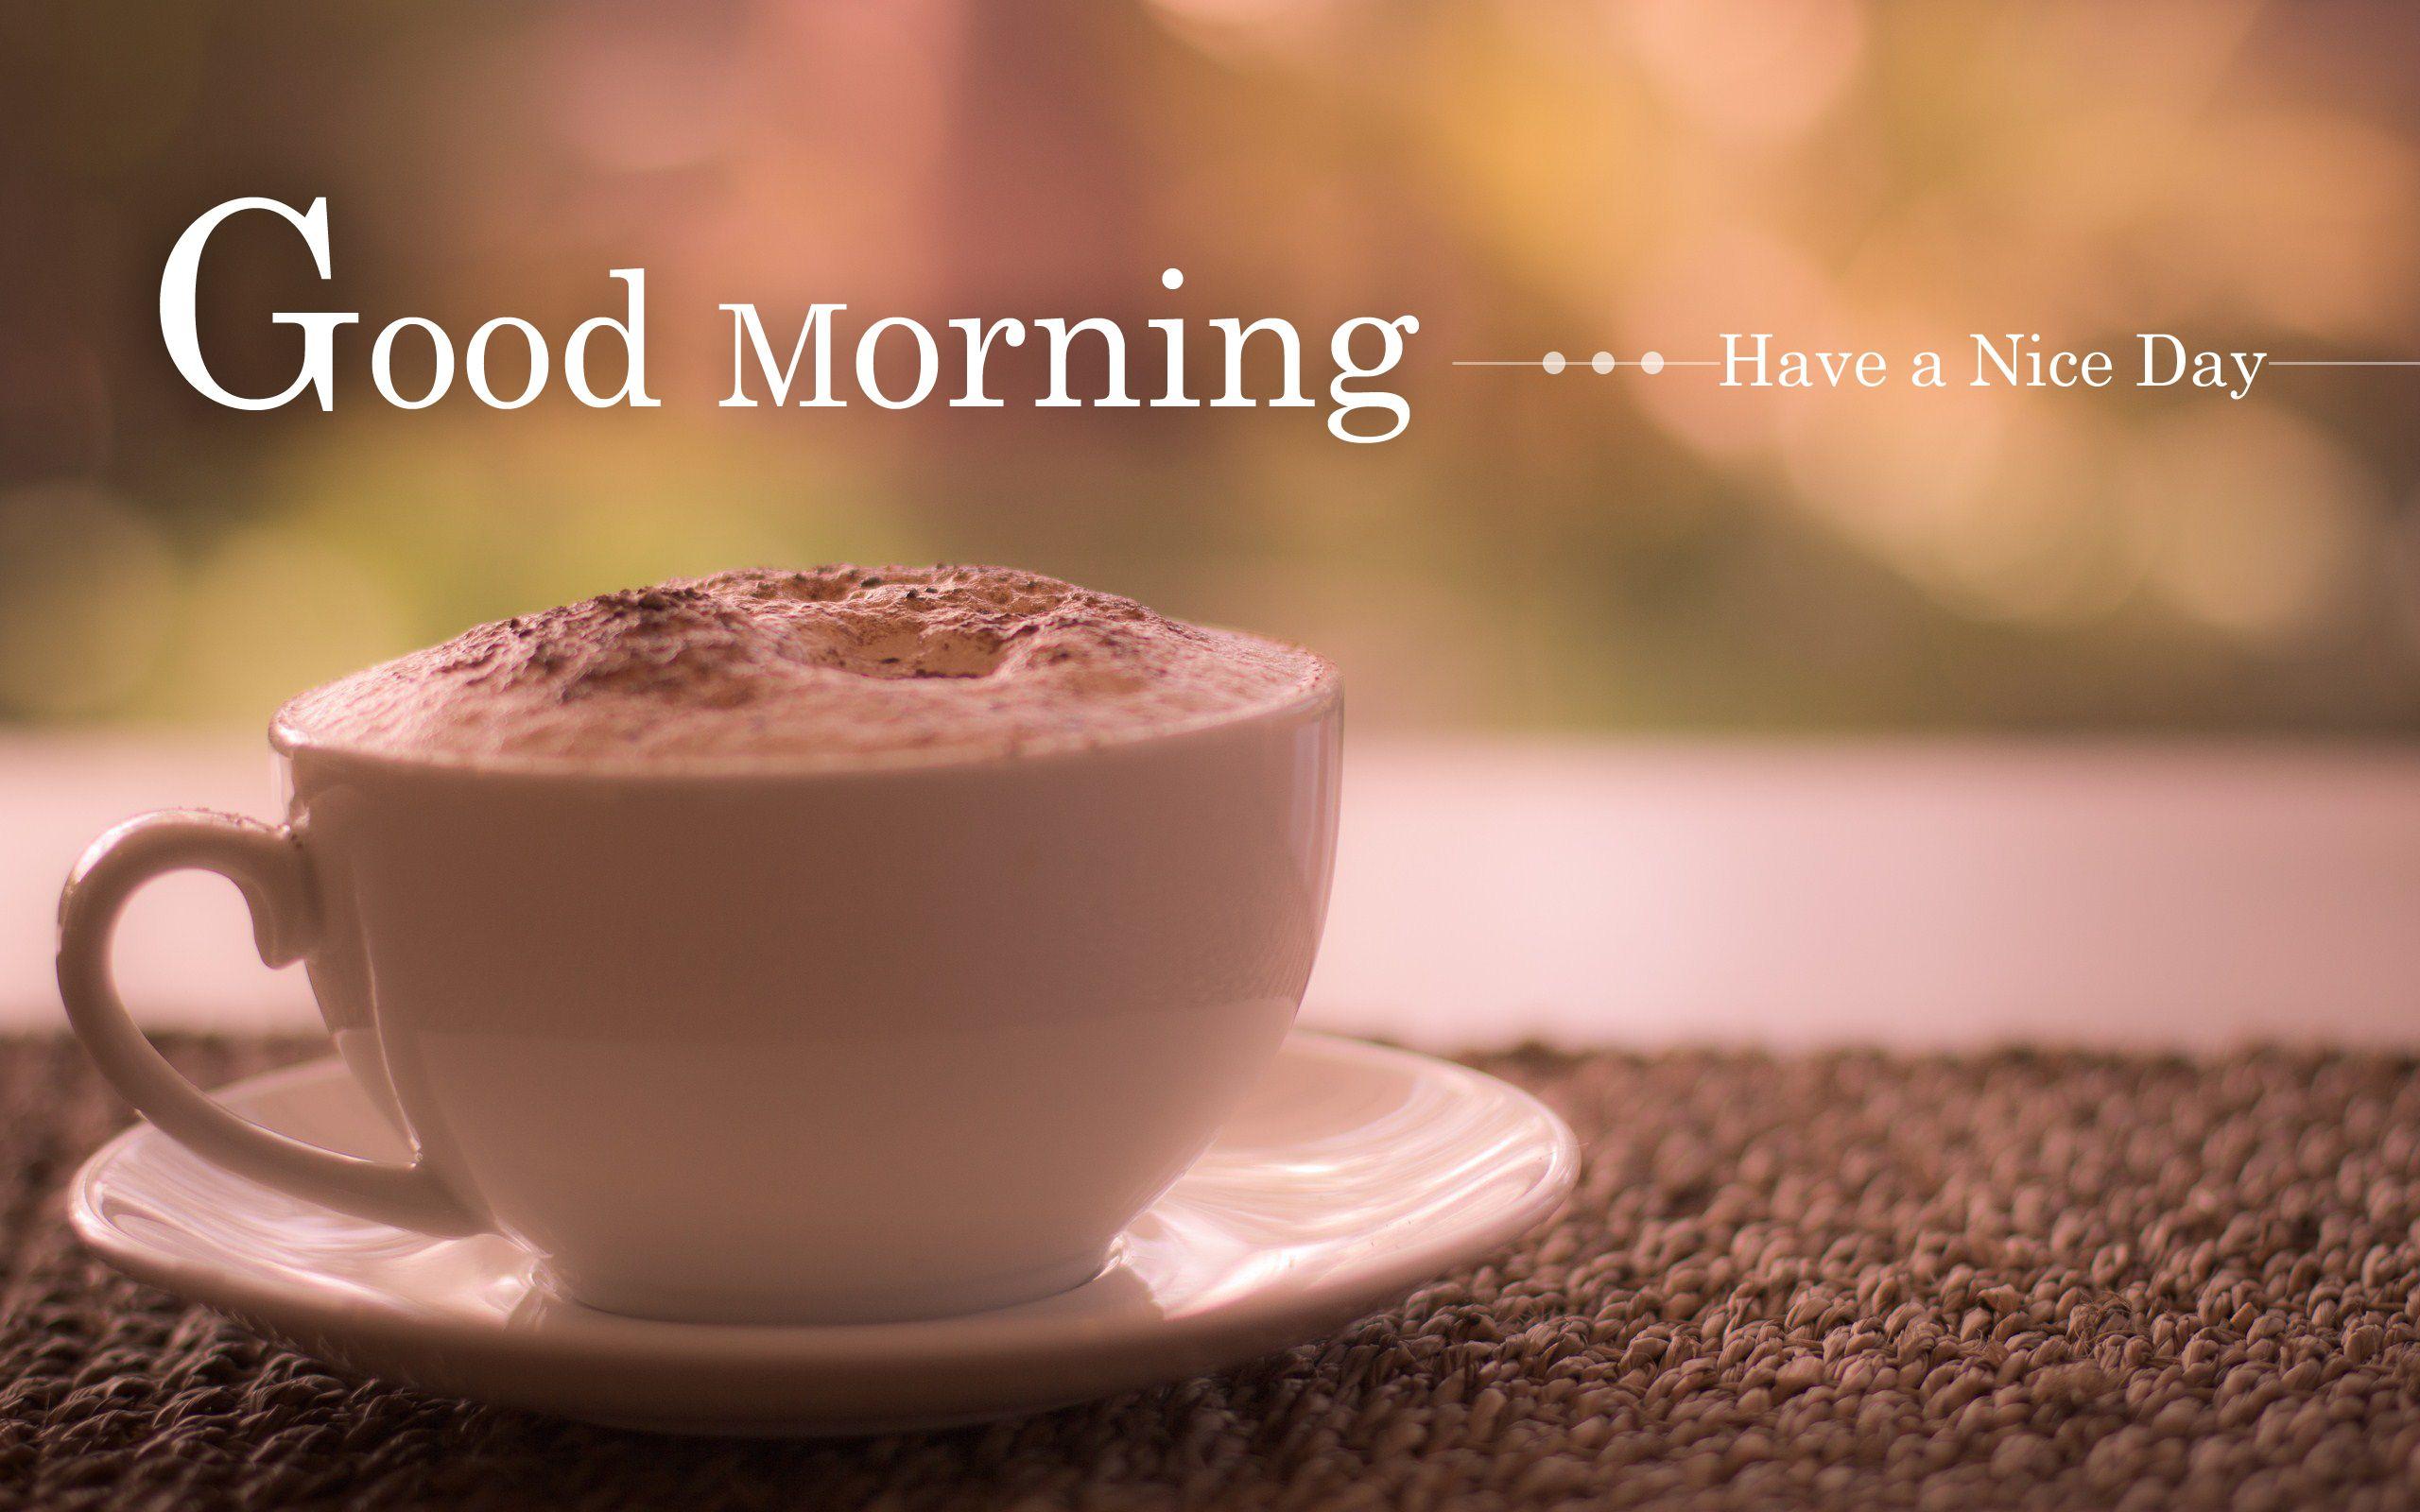 Image Gallery of Good Morning Have A Nice Day Coffee